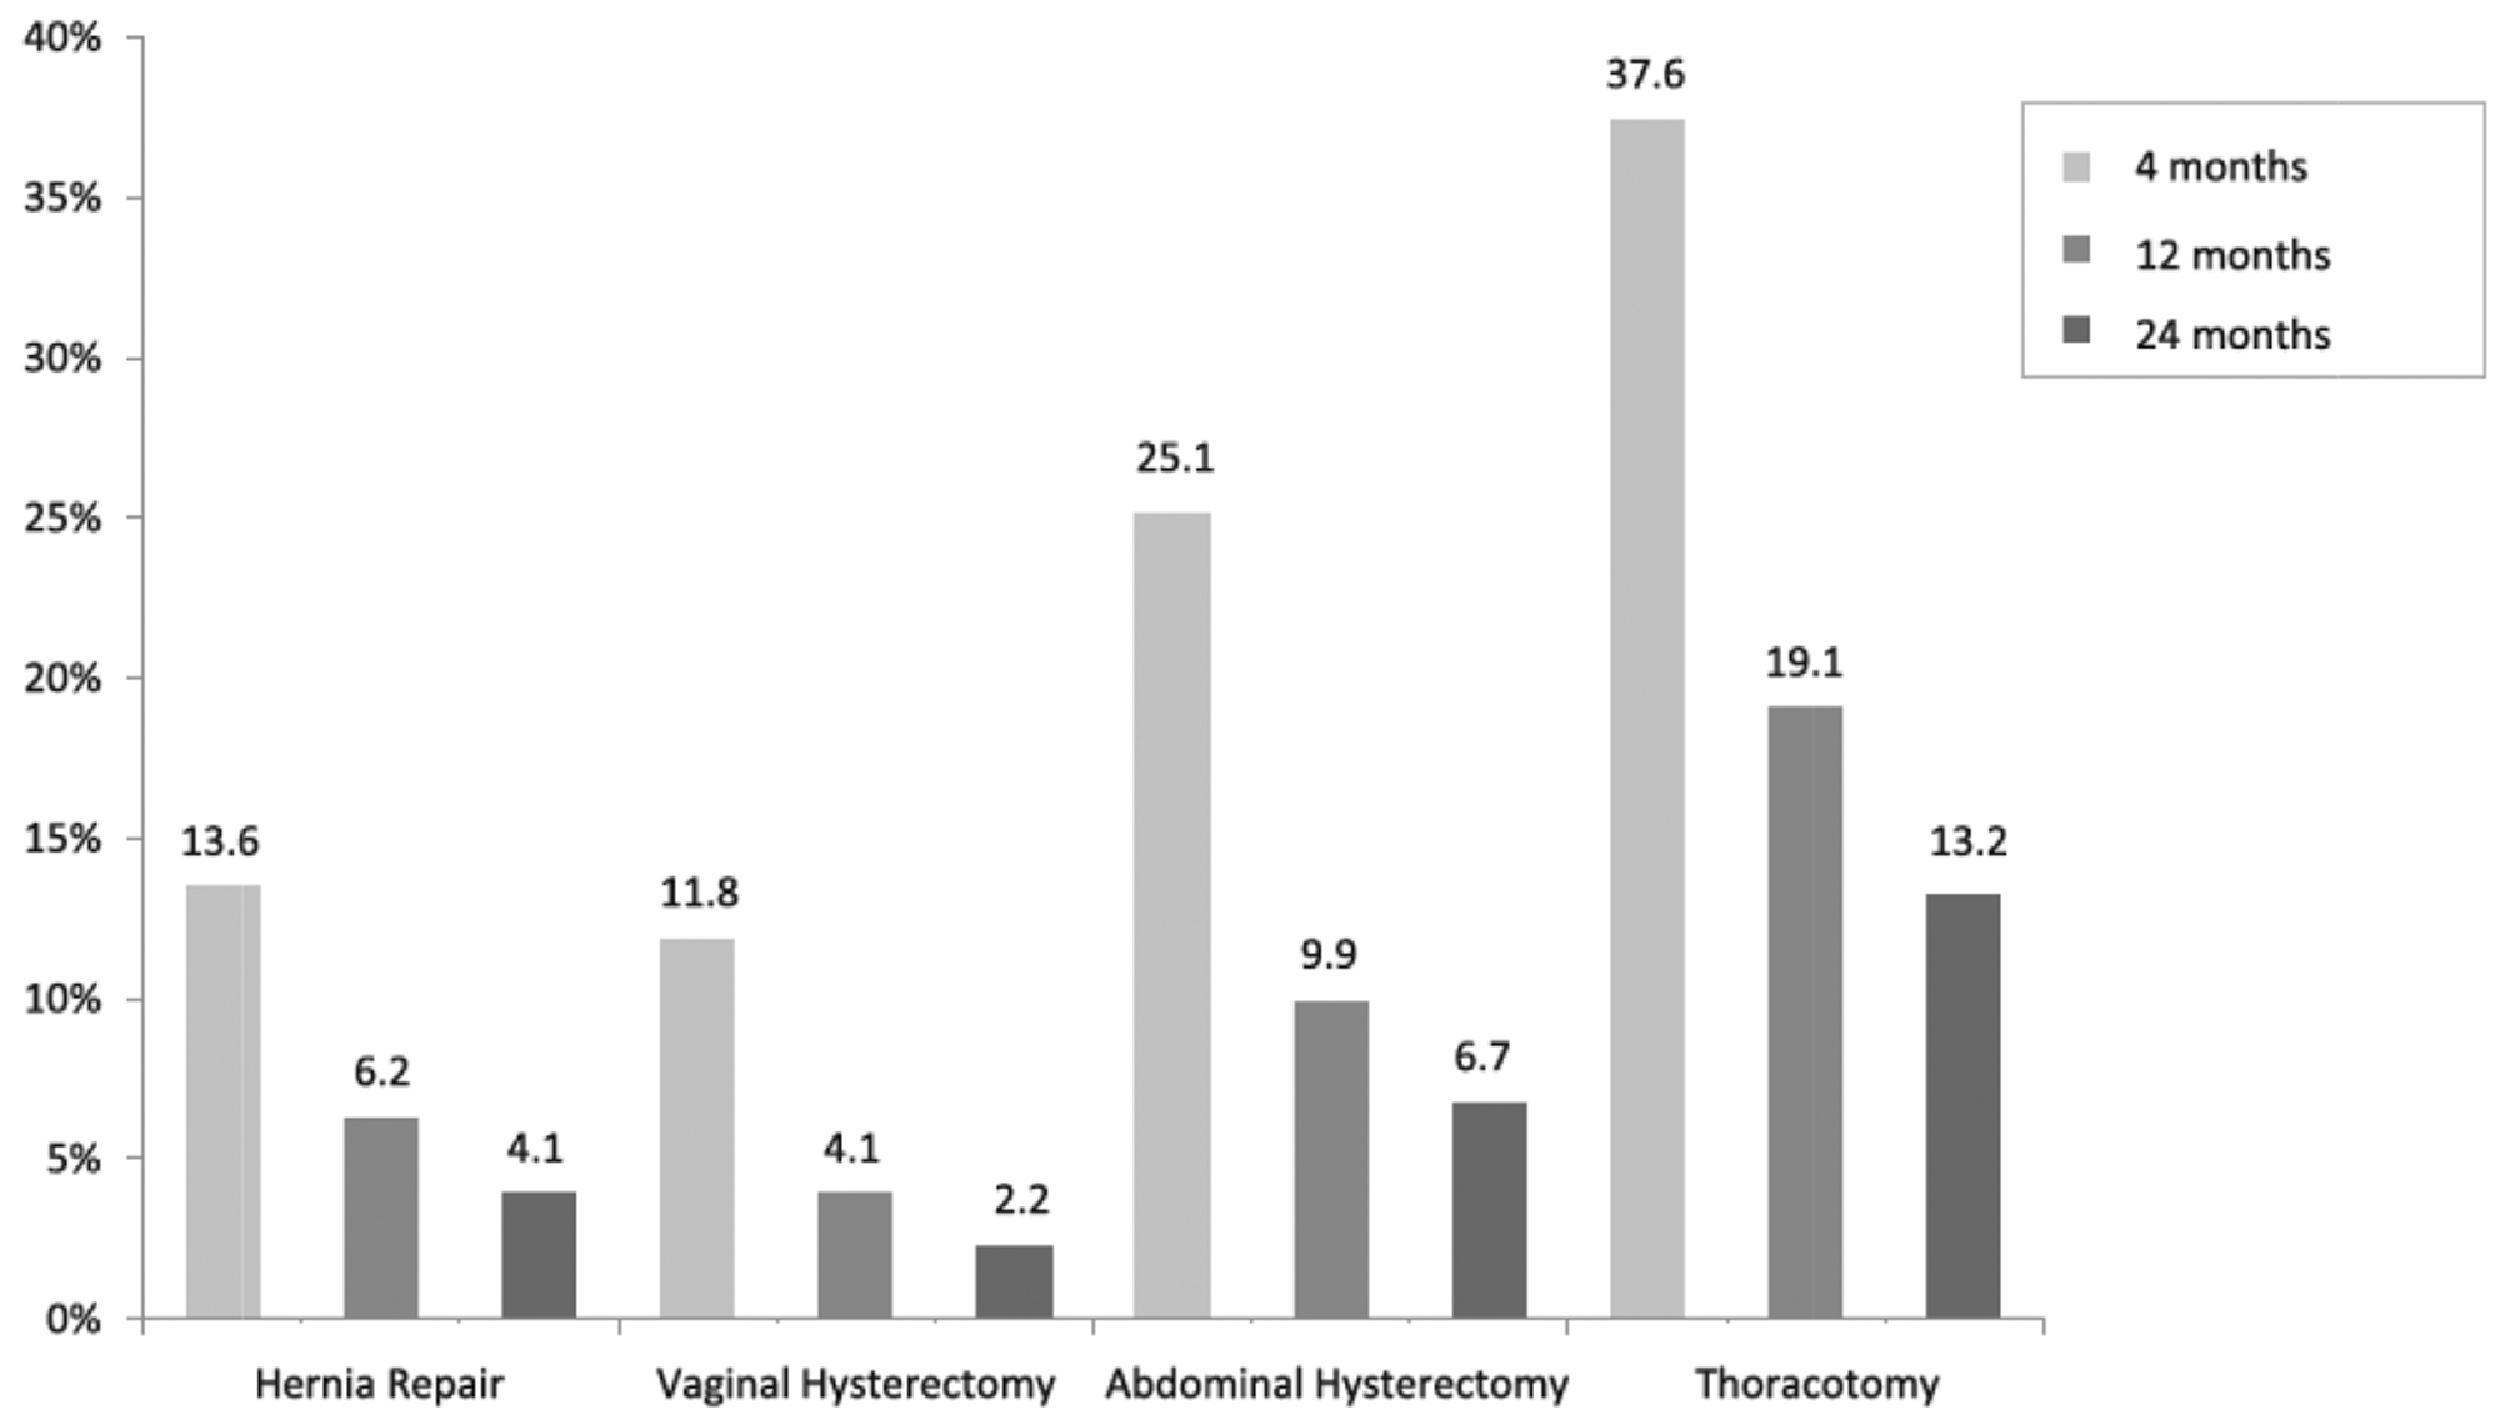 Figure 24.1Incidence of chronic post-surgical pain after hernia repair, hysterectomy, and thoracotomy at different time points after surgery. With permission from Montes et al. 16